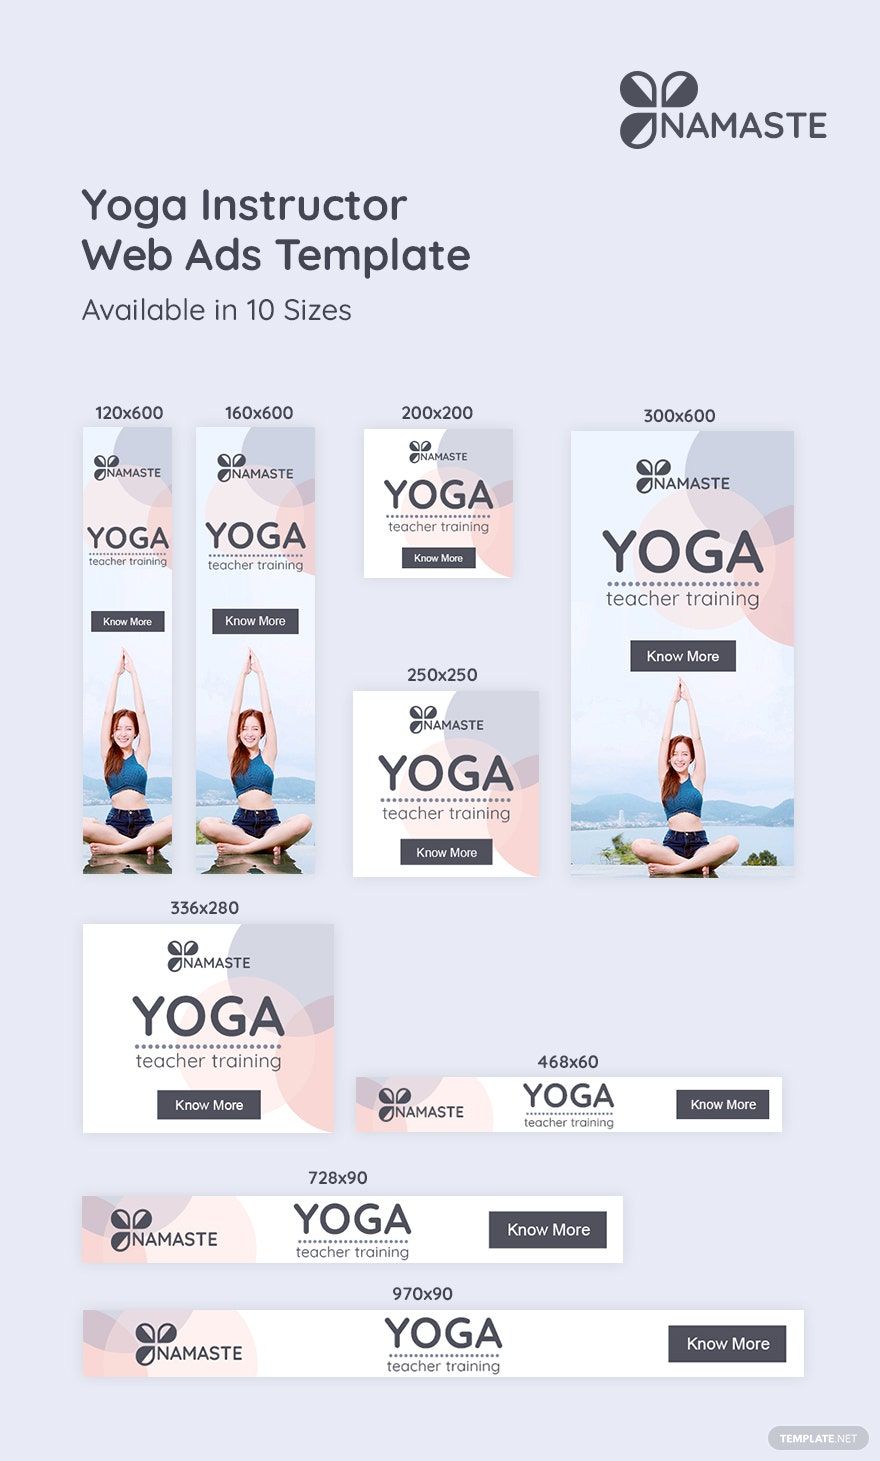 Yoga Instructor Web Ads Template